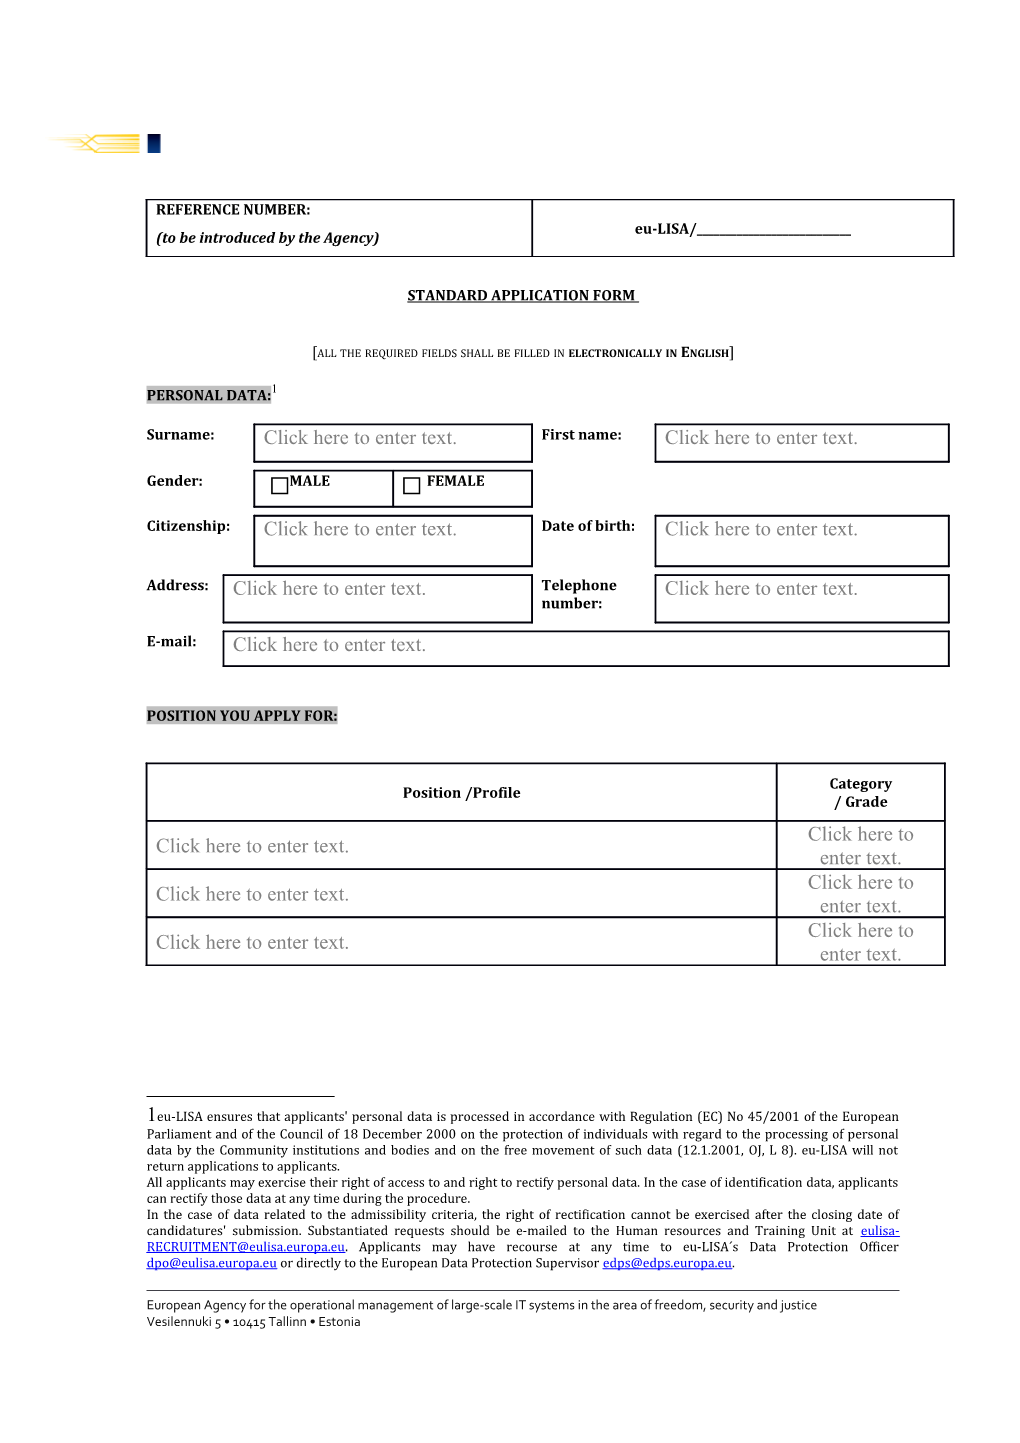 Standard Application Form (MS Word 2010/2007 Compatible)